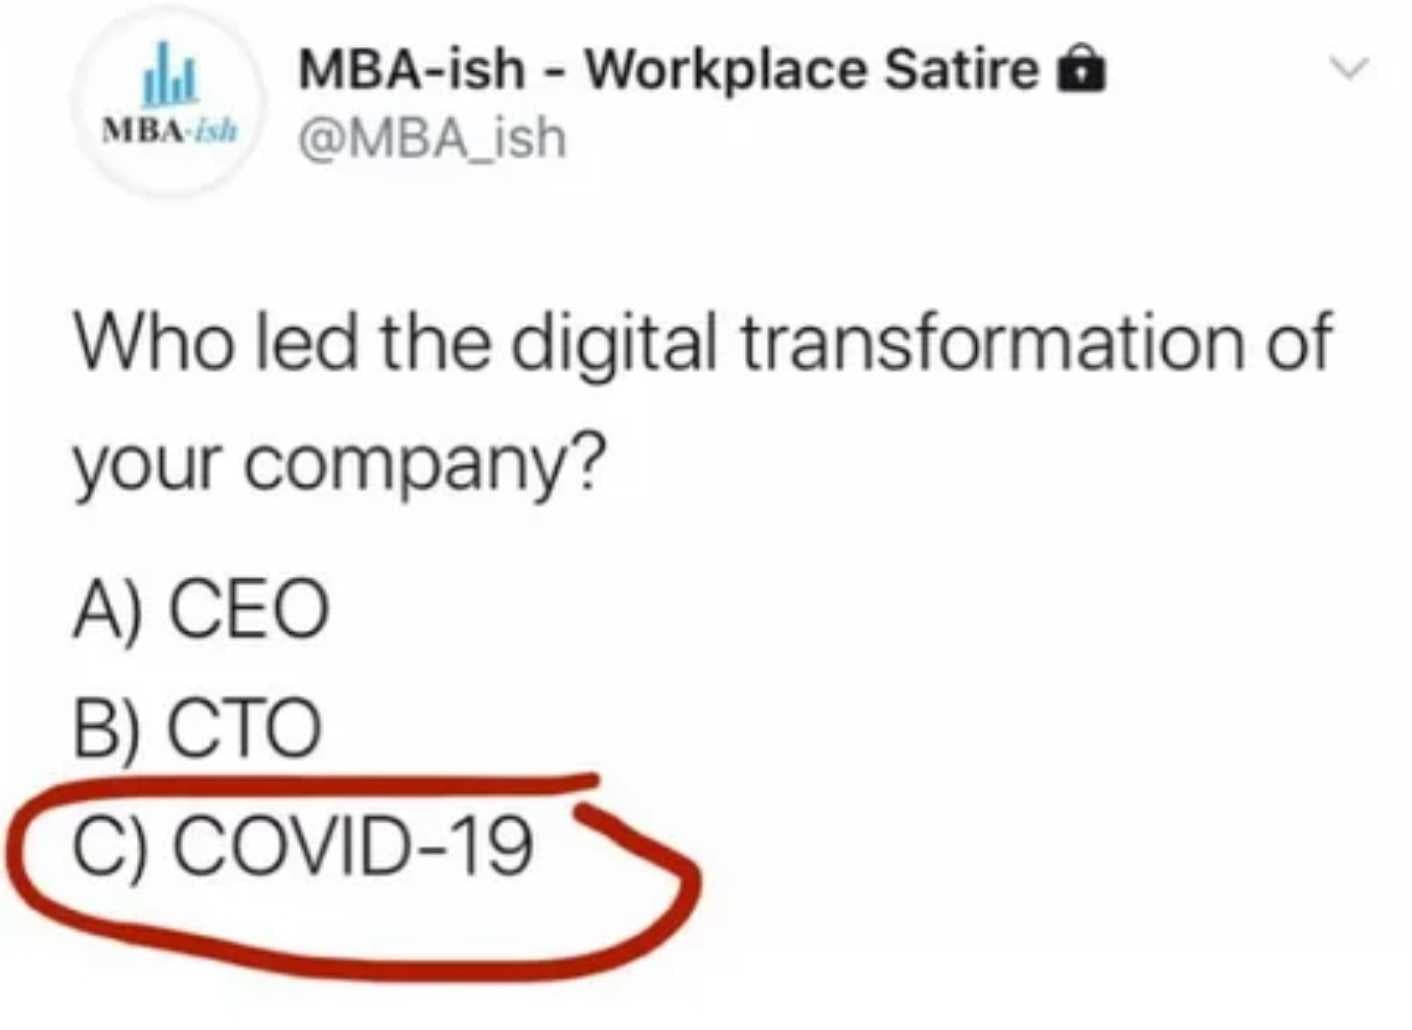 y mba ich workplace satire o mba m mba ich who led tee digital transformation of your company a ceo b ceo c covid